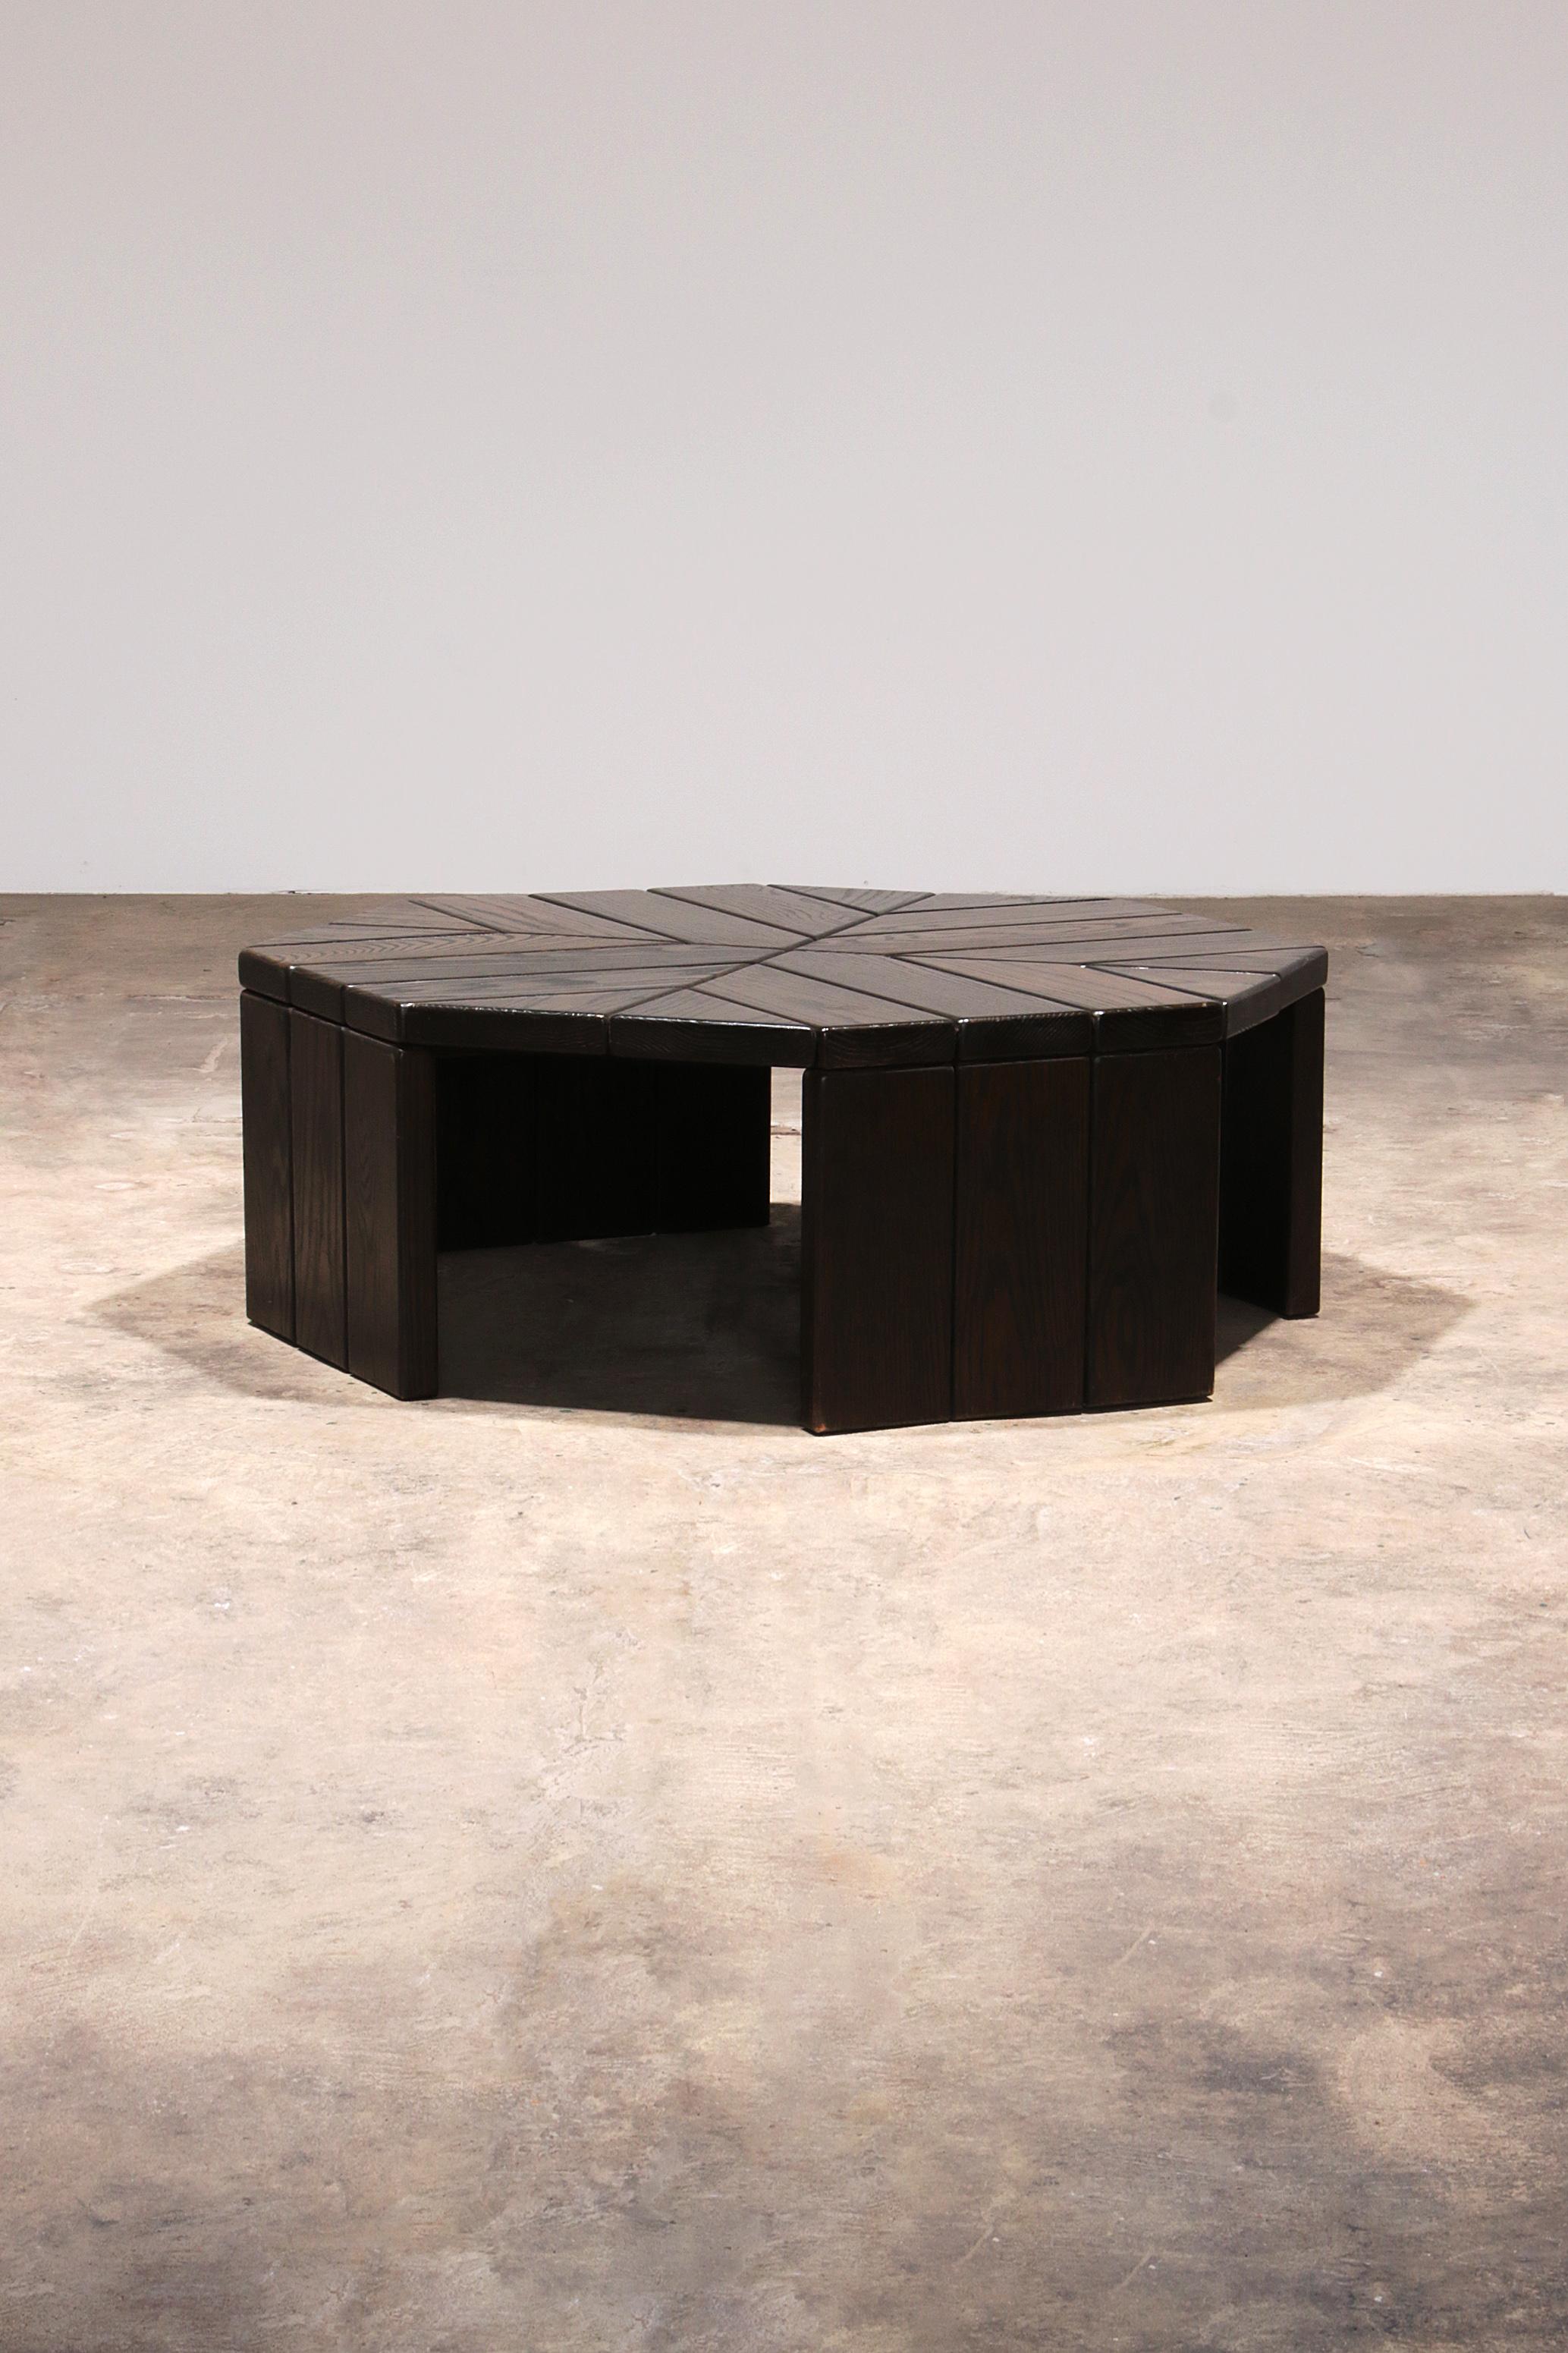 Discover the unique charm of our Brutalist Oak Coffee Table, a beautiful piece of craftsmanship from 1970. This octagonal coffee table, with its robust and striking design, is a real eye-catcher in any interior. Manufactured in Germany, this table